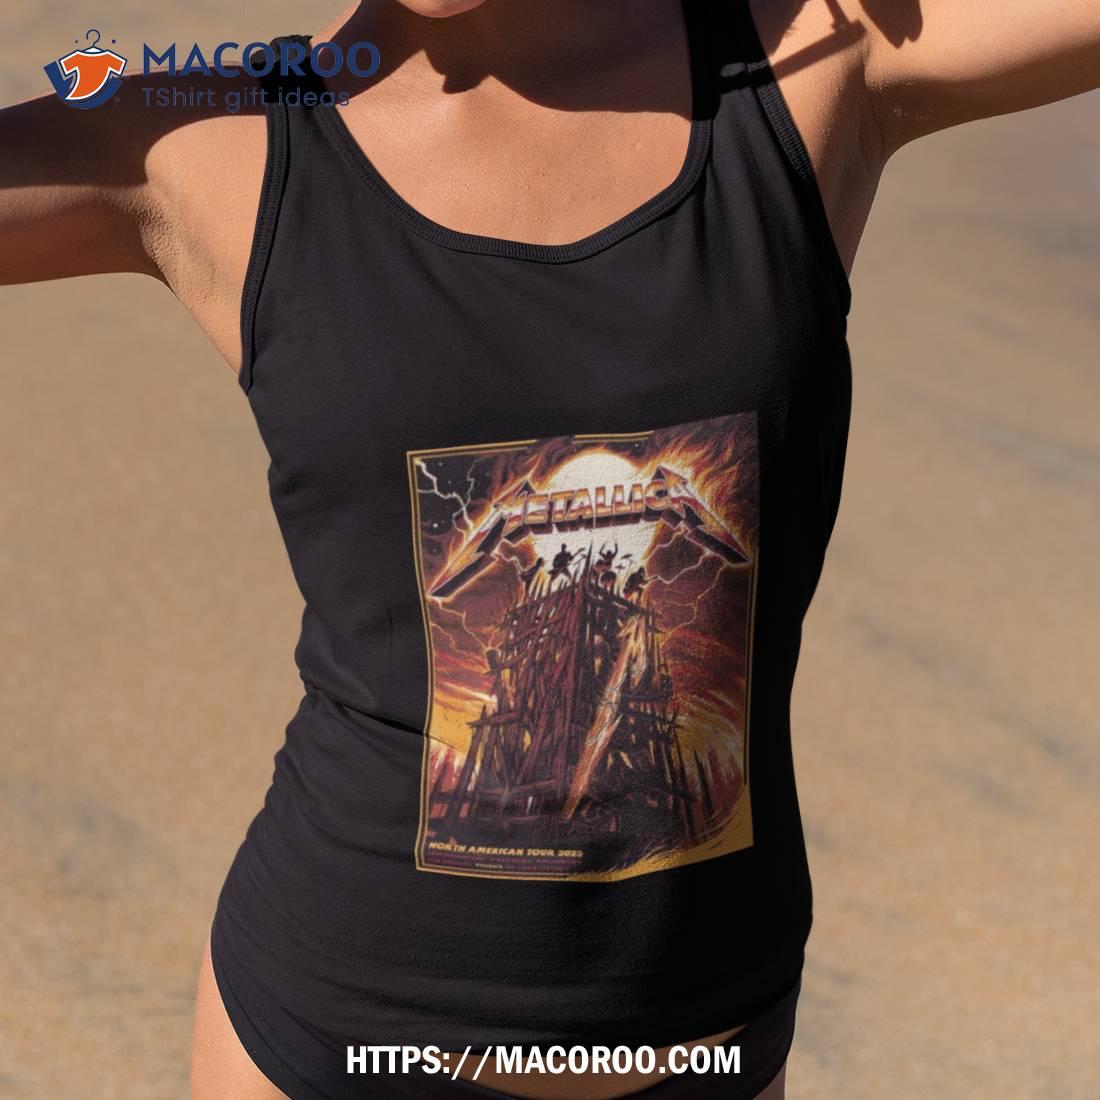 Metallica North American Tour 2023 Official Colorway Of Pop Up Shop Poster For M72 Phoenix Unisex Shirt Tank Top 2